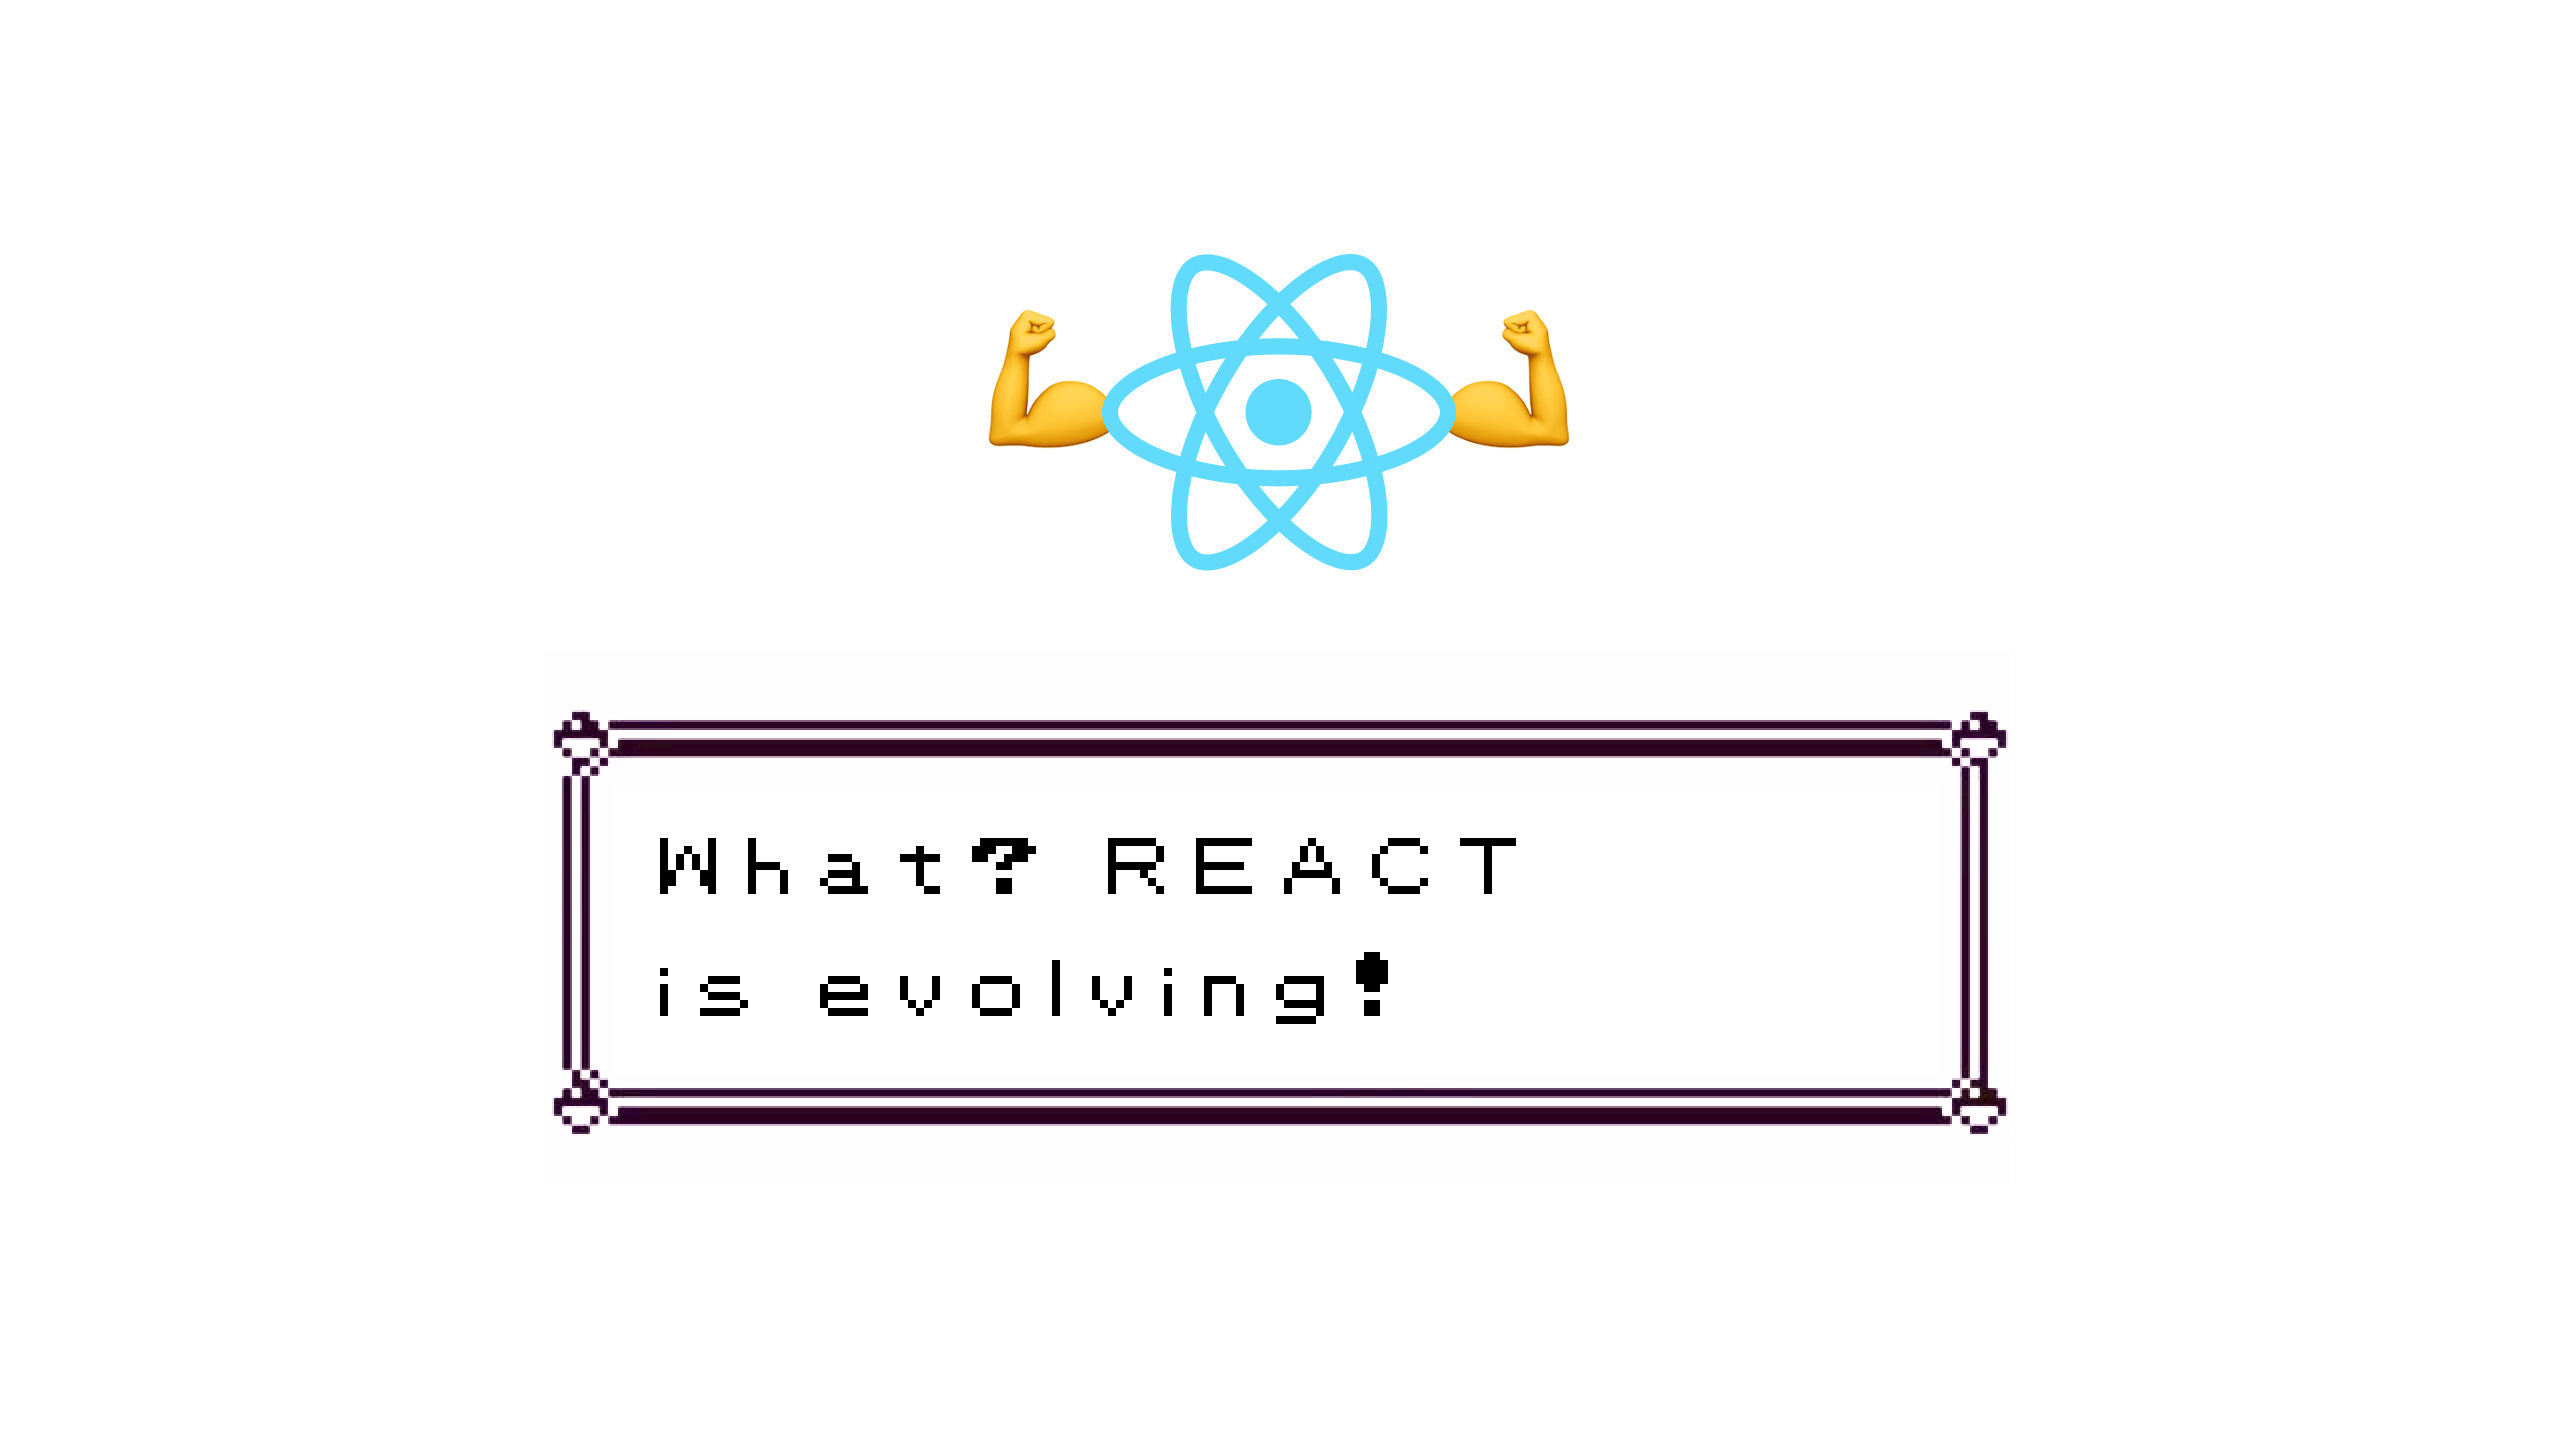 Create a spinner wheel in react native - Stack Overflow